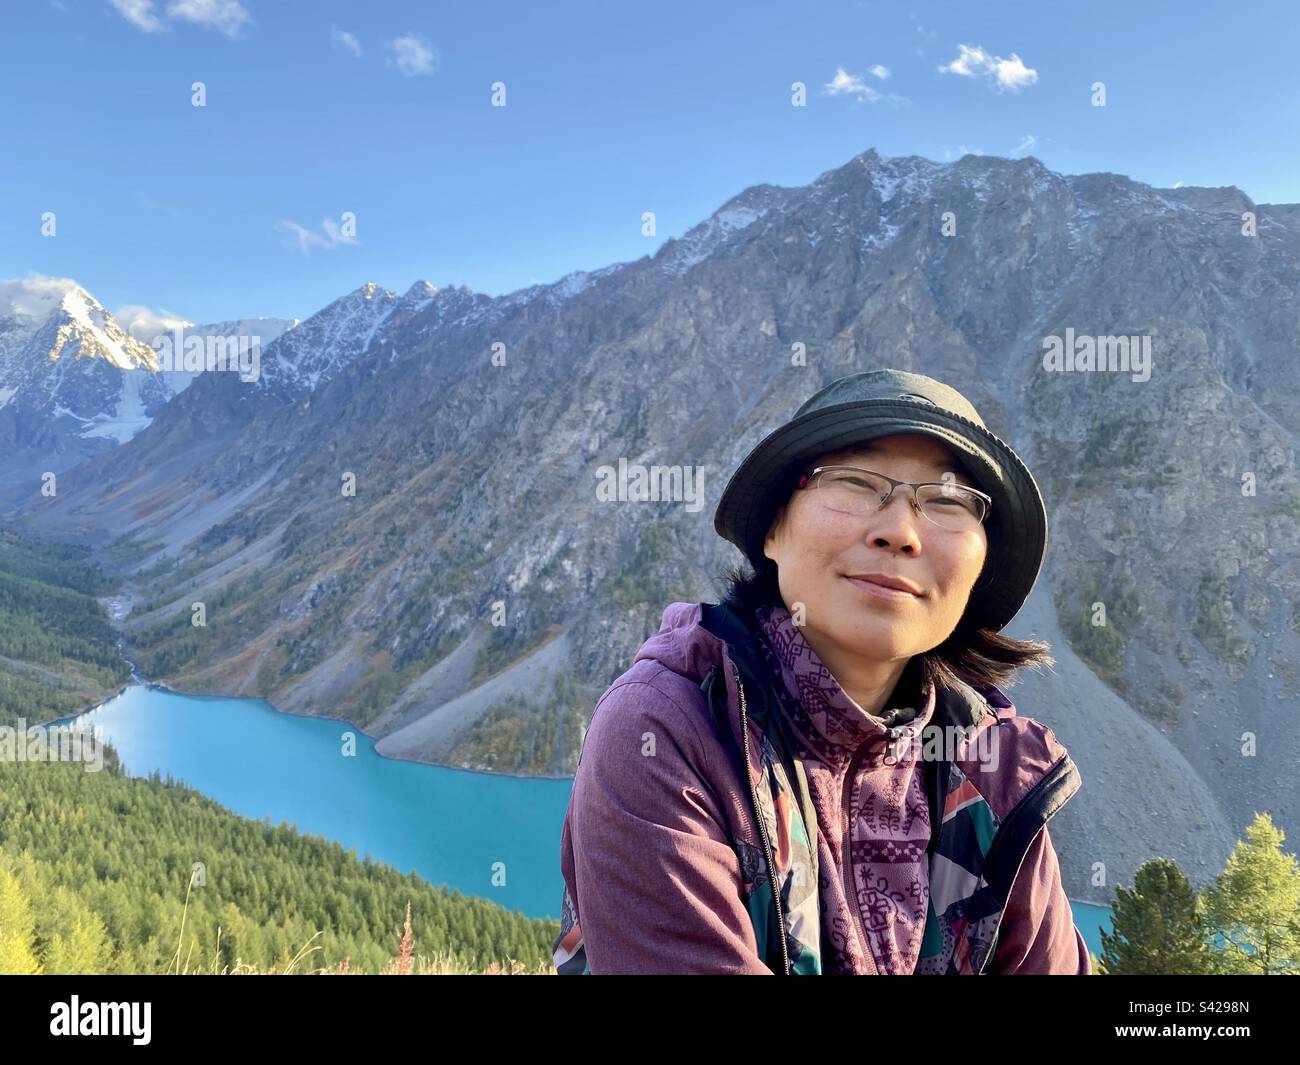 Portrait of a smiling Asian girl tourist Yakut on a rock near an Alpine lake at sunset in the Altai mountains. Stock Photo